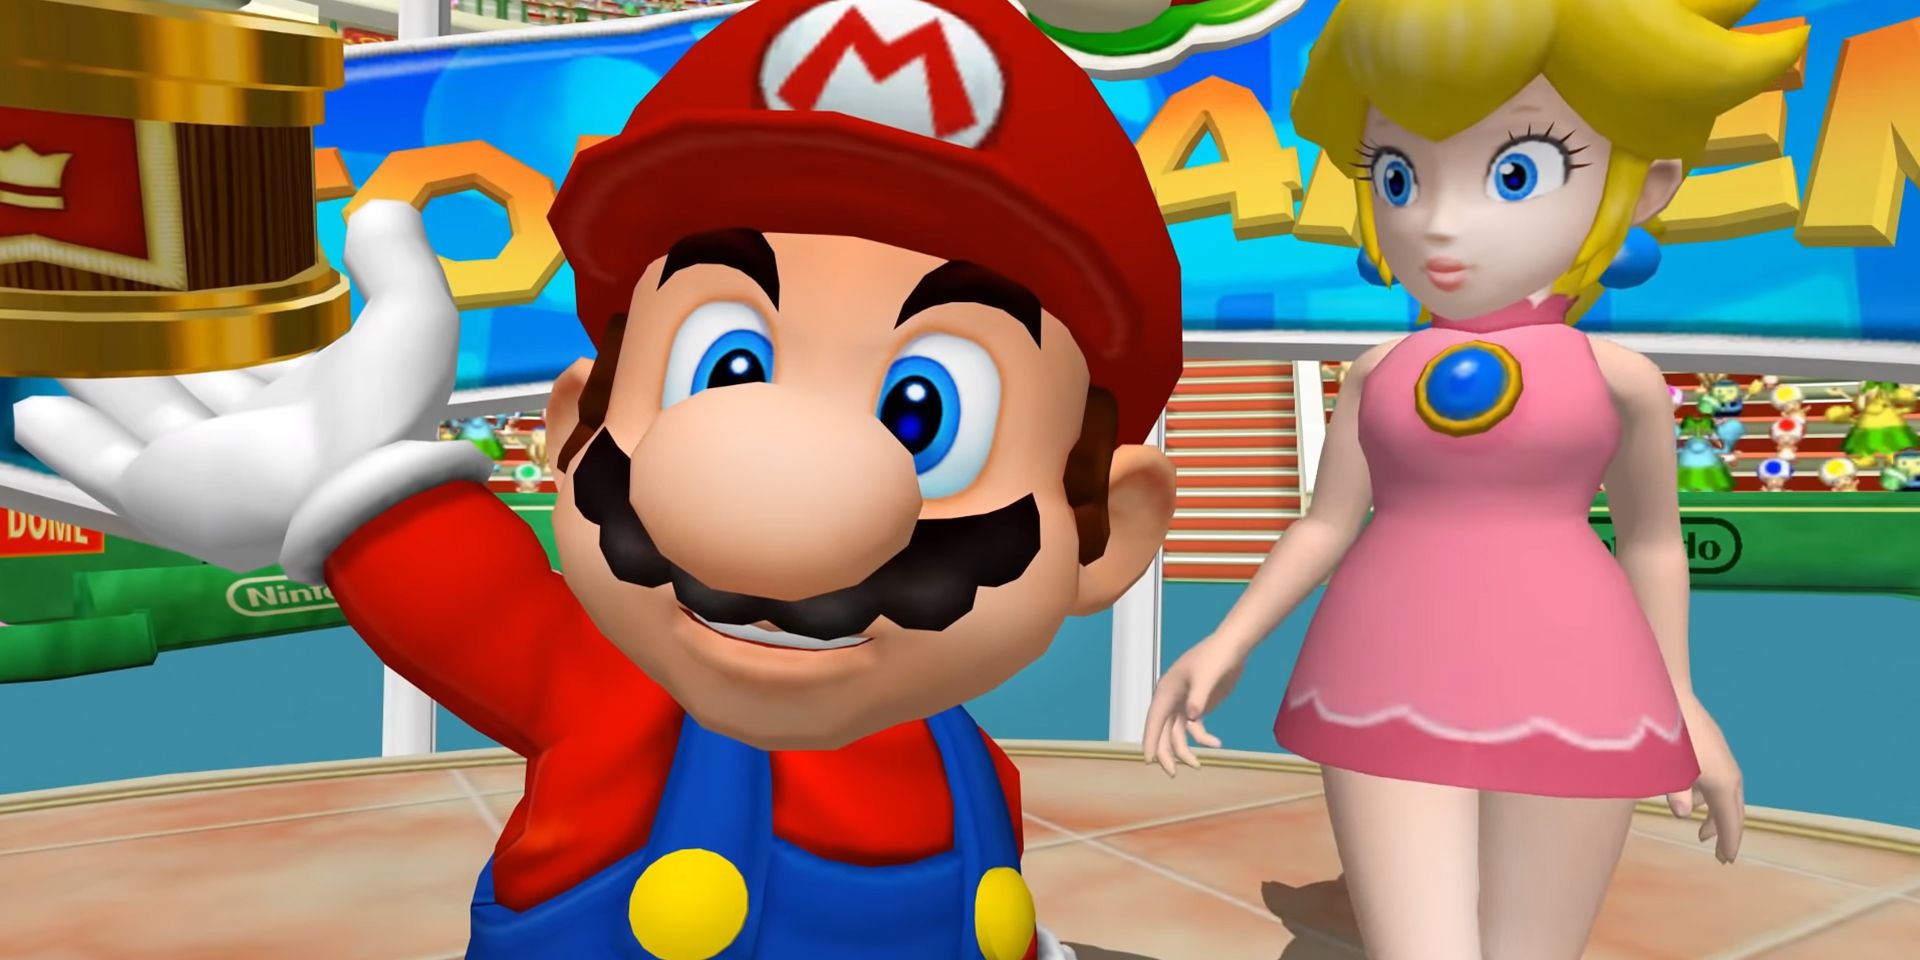 10 Wholesome Memes About Mario And Peach's Relationship - Featured